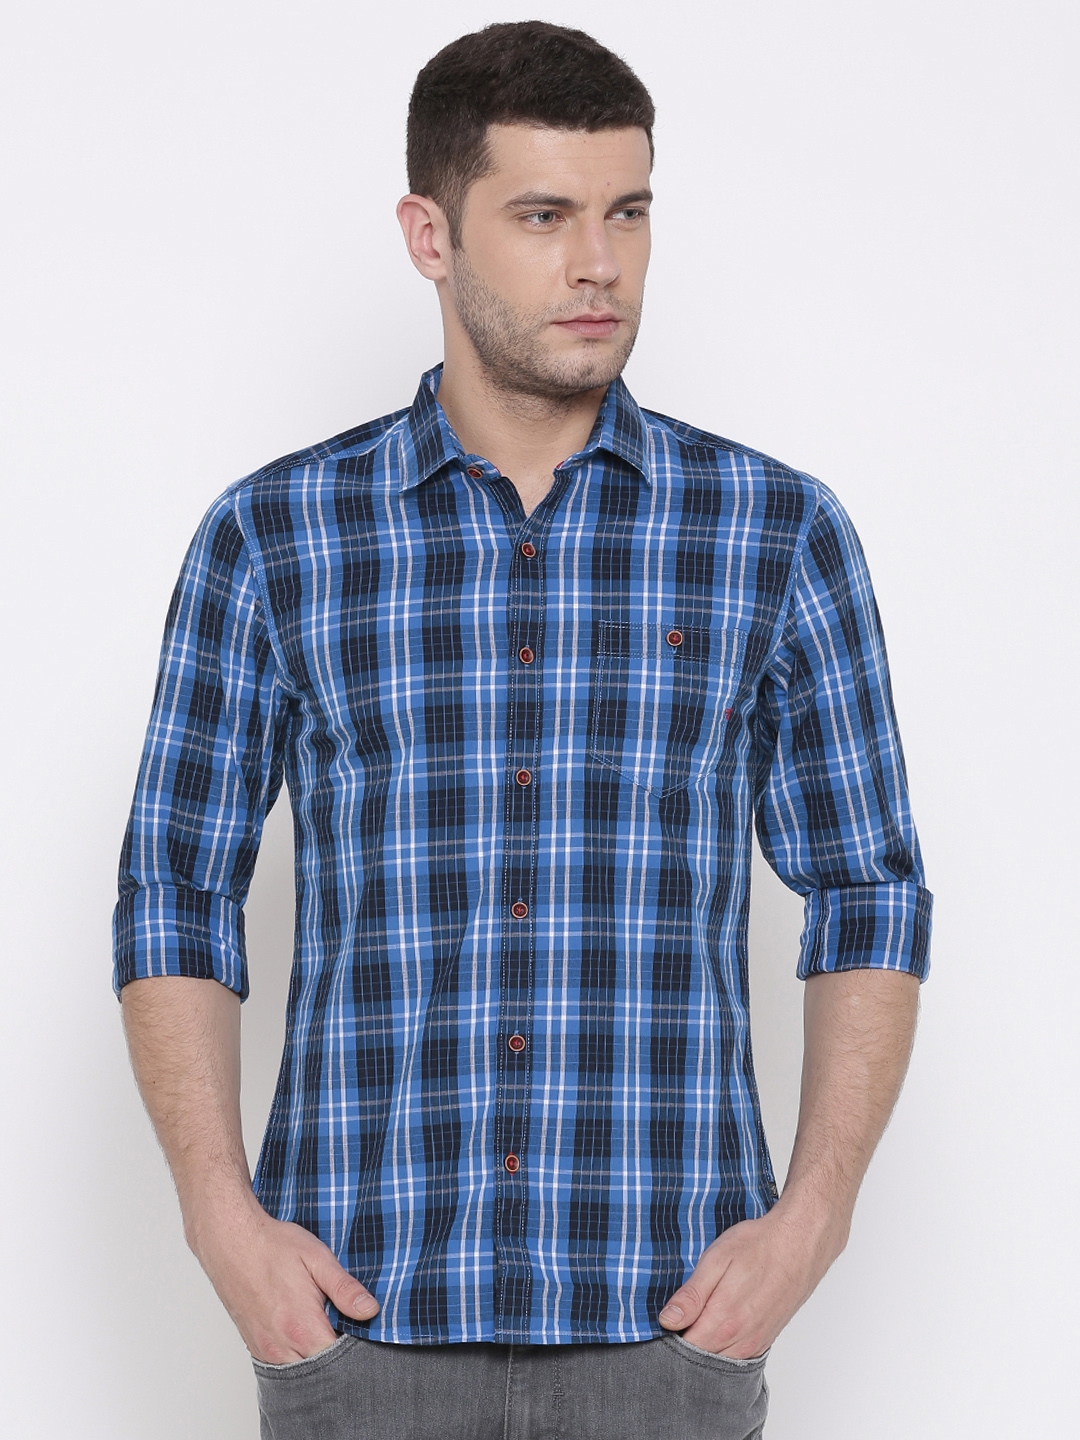 Buy The Indian Garage Co Men Blue & White Slim Fit Checked Casual Shirt ...